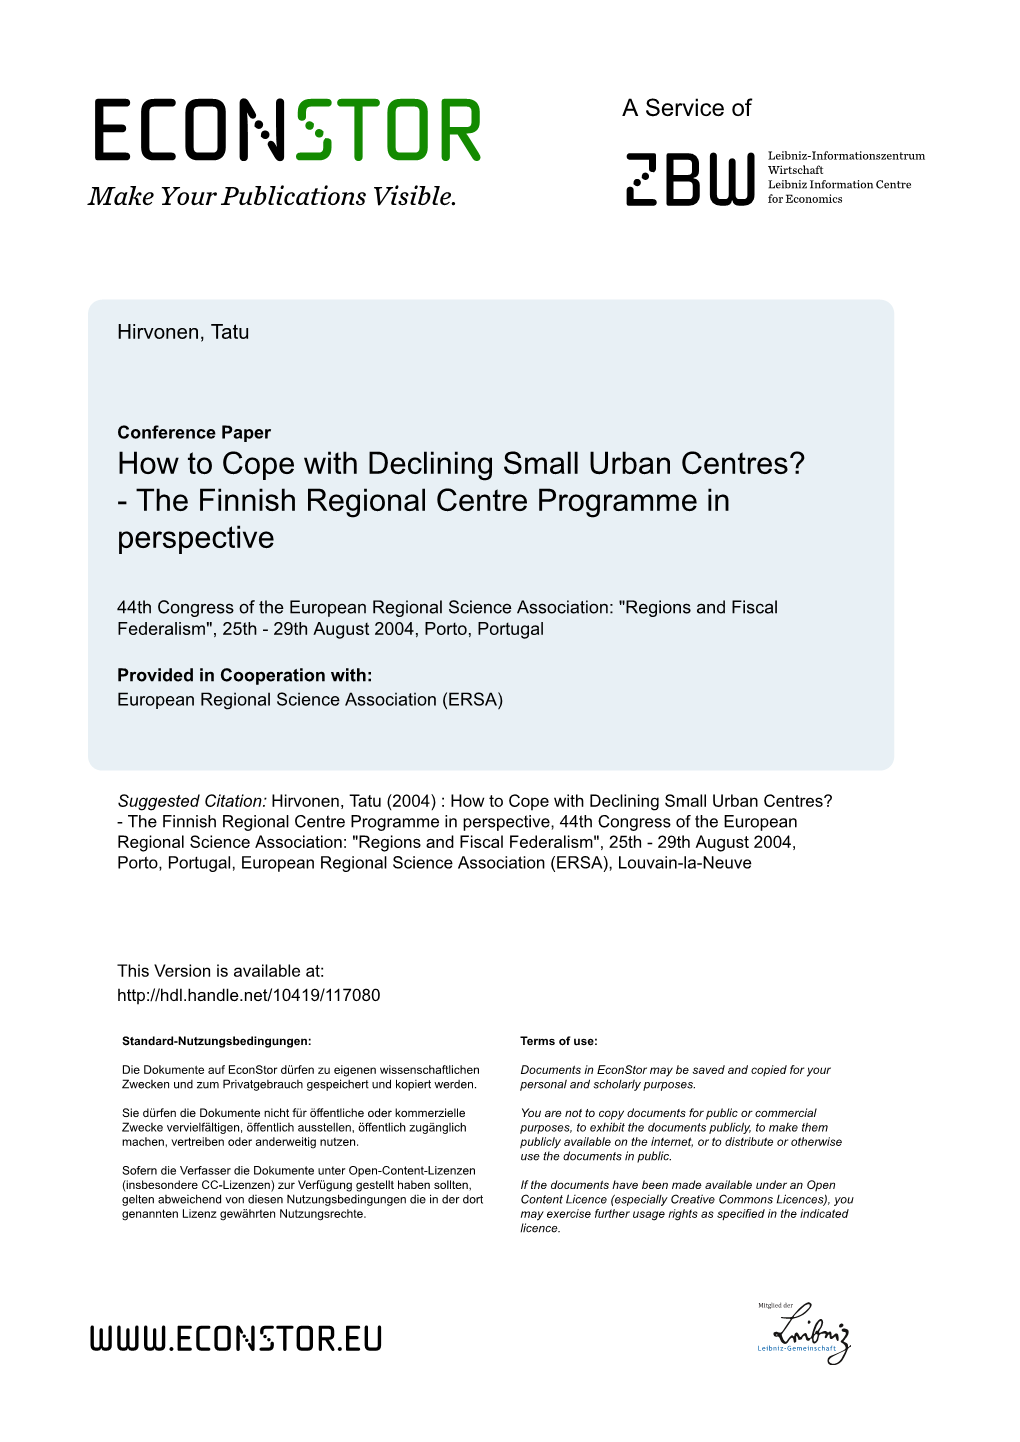 The Finnish Regional Centre Programme in Perspective